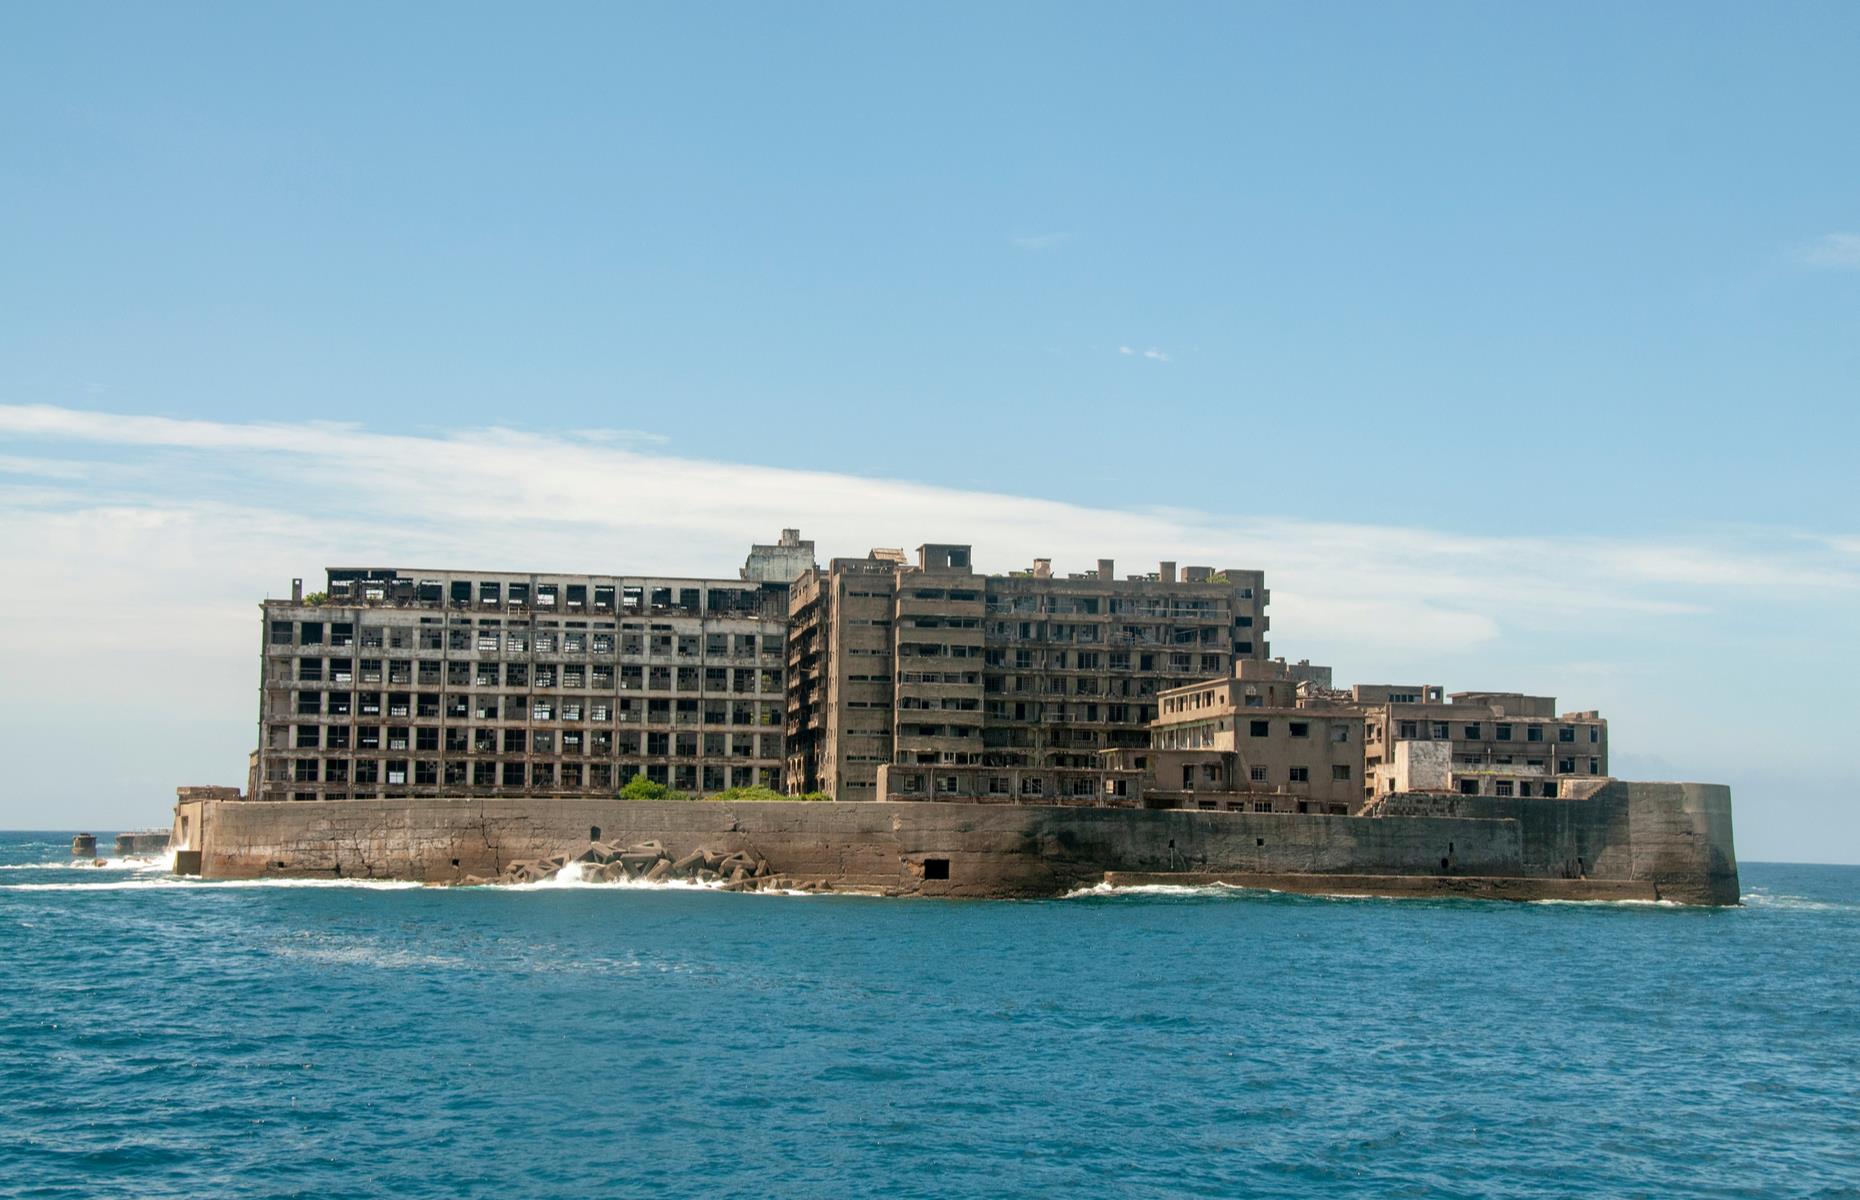 <p>Japan was once again the setting for a villain’s lair in 2012’s <em>Skyfall</em>. The deserted and tiny Hashima Island, a dilapidated coal-mining factory just off the coast of Nagasaki, made an extremely atmospheric hideout for Bond's creepy nemesis, Raoul Silva (Javier Bardem). Now preserved as a UNESCO World Heritage Site, the industrial wasteland is also known as Gunkanjima (Battleship Island) because of its shape. It’s possible to visit the ghost town on guided tours with cruises departing regularly from Nagasaki's port.</p>  <p><a href="https://www.loveexploring.com/galleries/85261/incredible-photos-of-abandoned-islands-the-world-forgot?page=1"><strong>Incredible photos of abandoned islands the world forgot</strong></a></p>